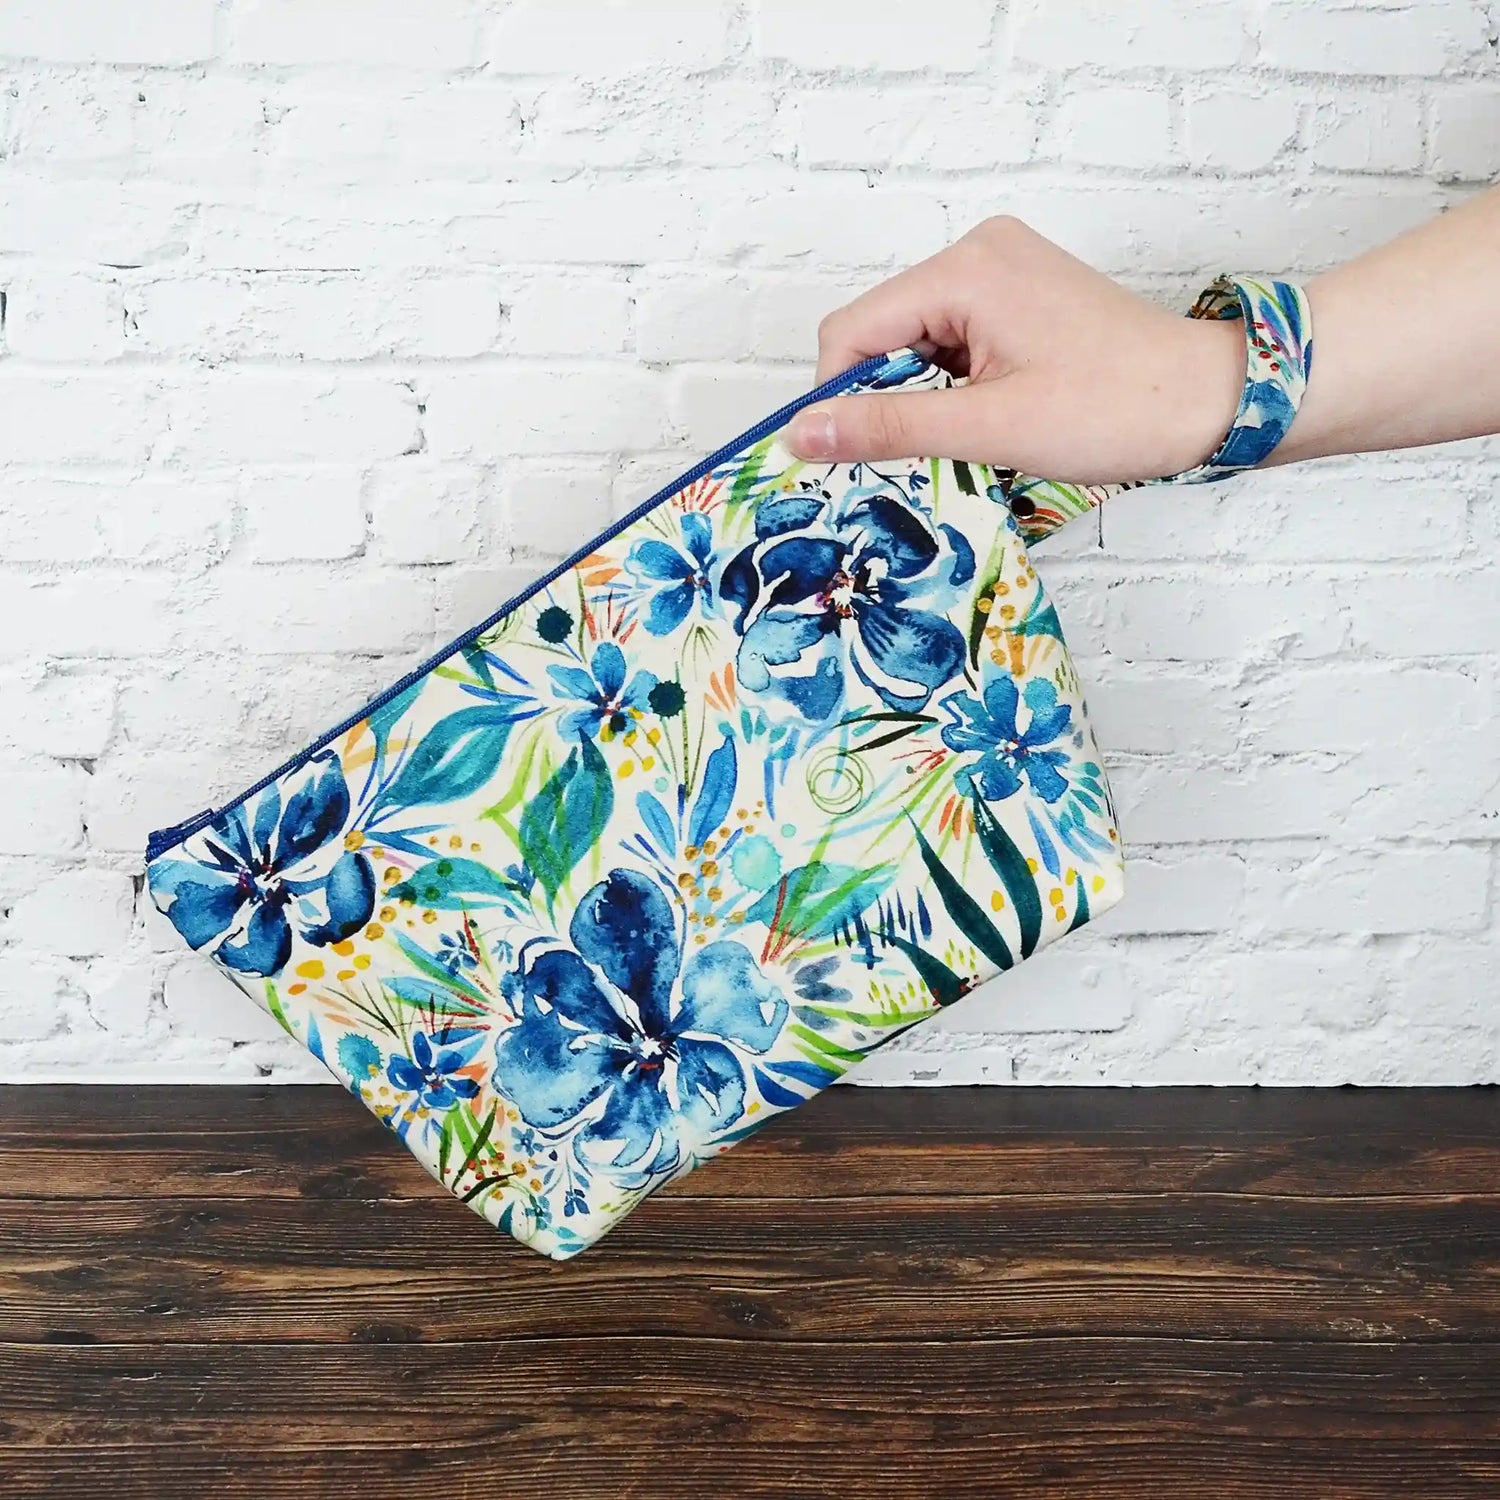 Watercolour print canvas zippered bag in blues and greens on natural canvas.  Made in Nova Scotia, Canada by Yellow Petal Handmade.